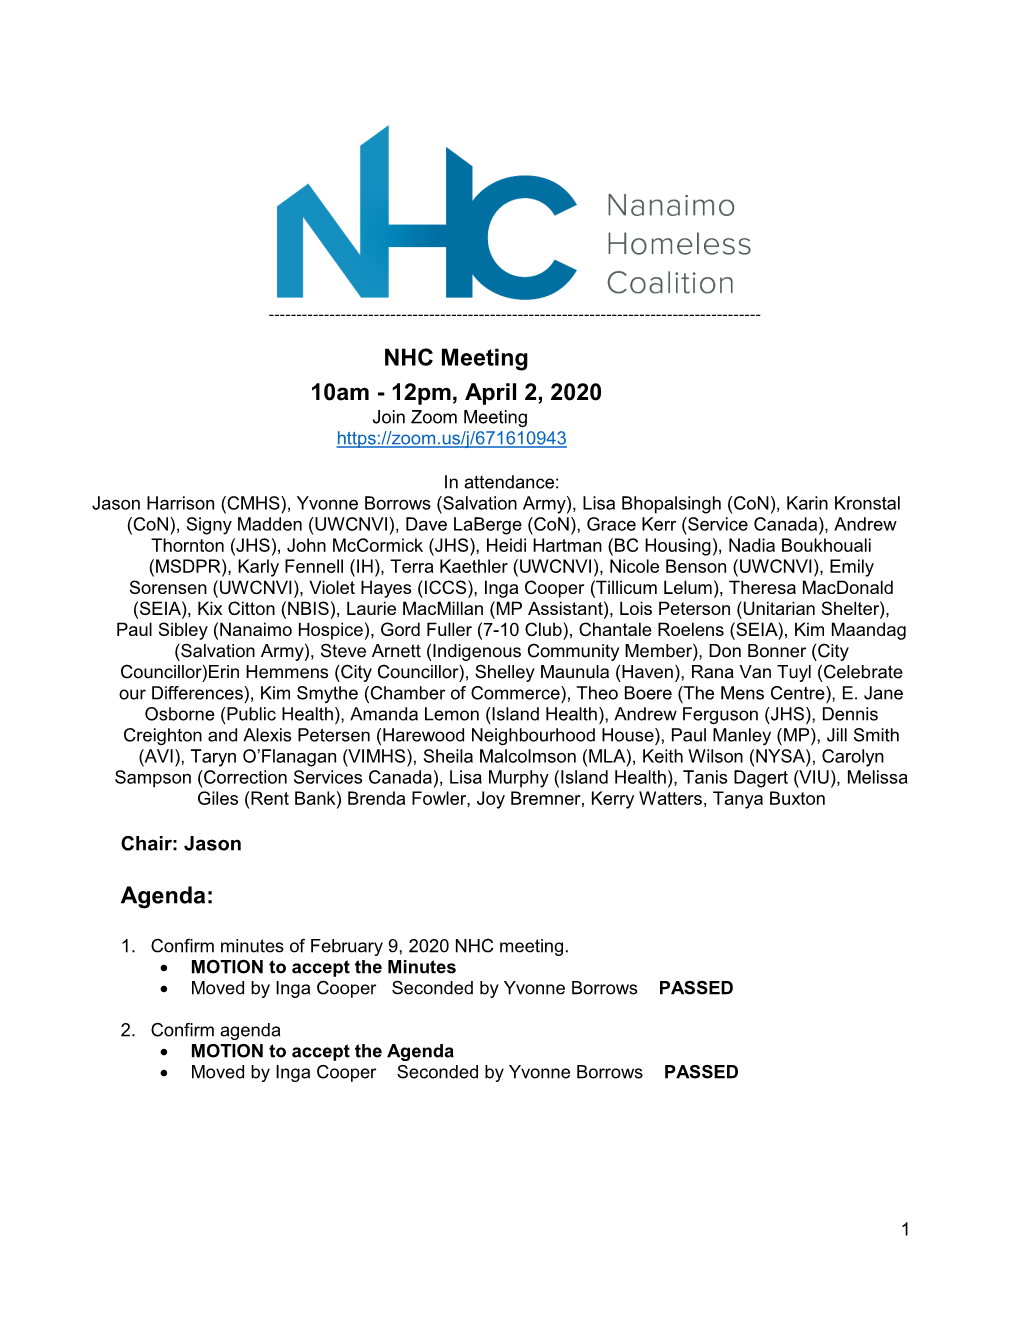 NHC Meeting 10Am - 12Pm, April 2, 2020 Join Zoom Meeting